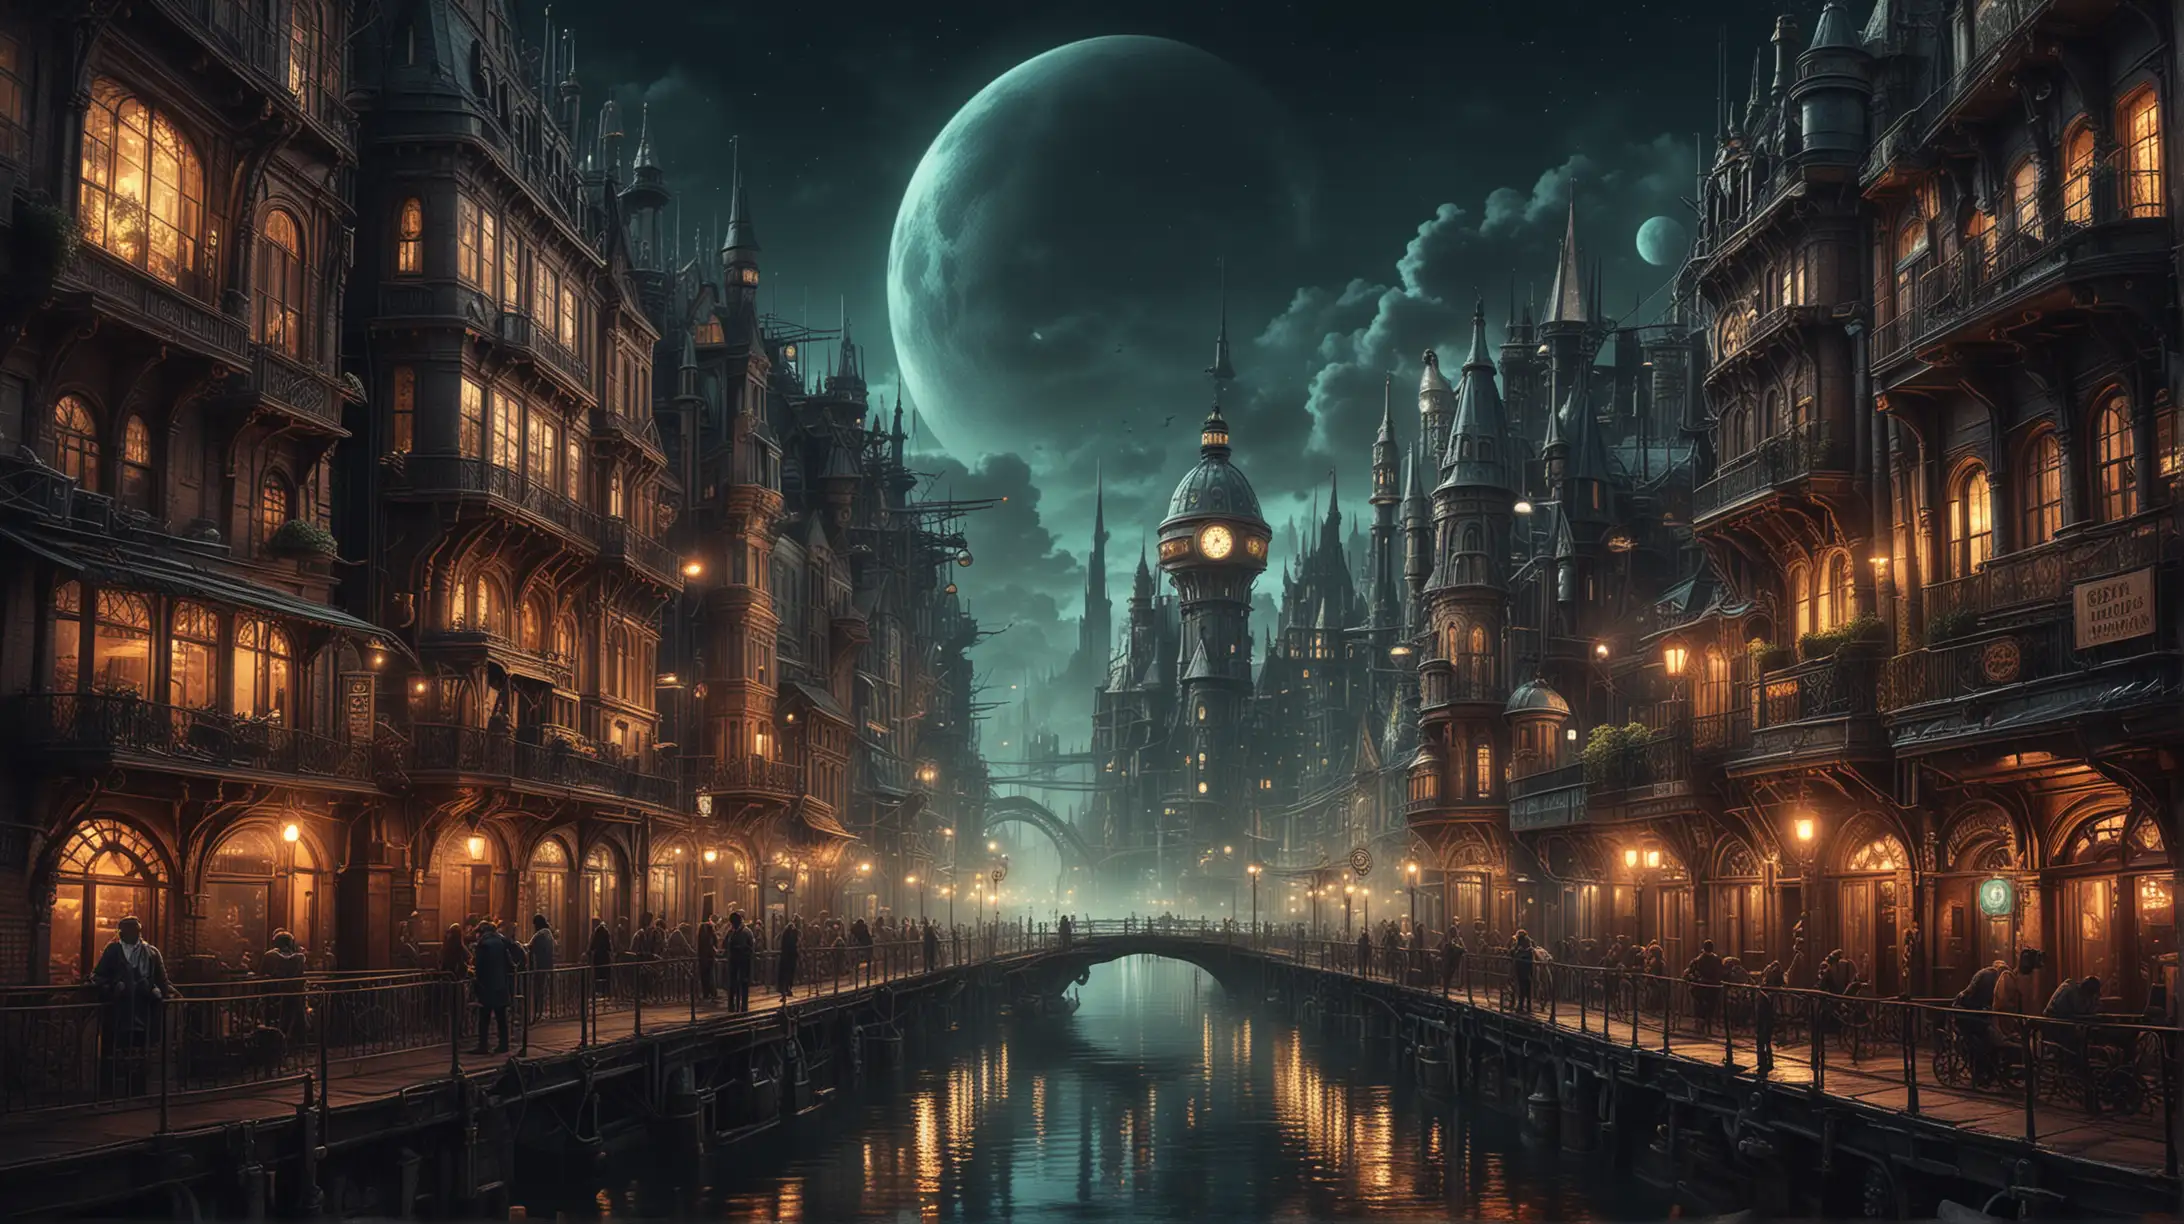 Steampunk City Nightscape Vibrant Psychedelic Vision